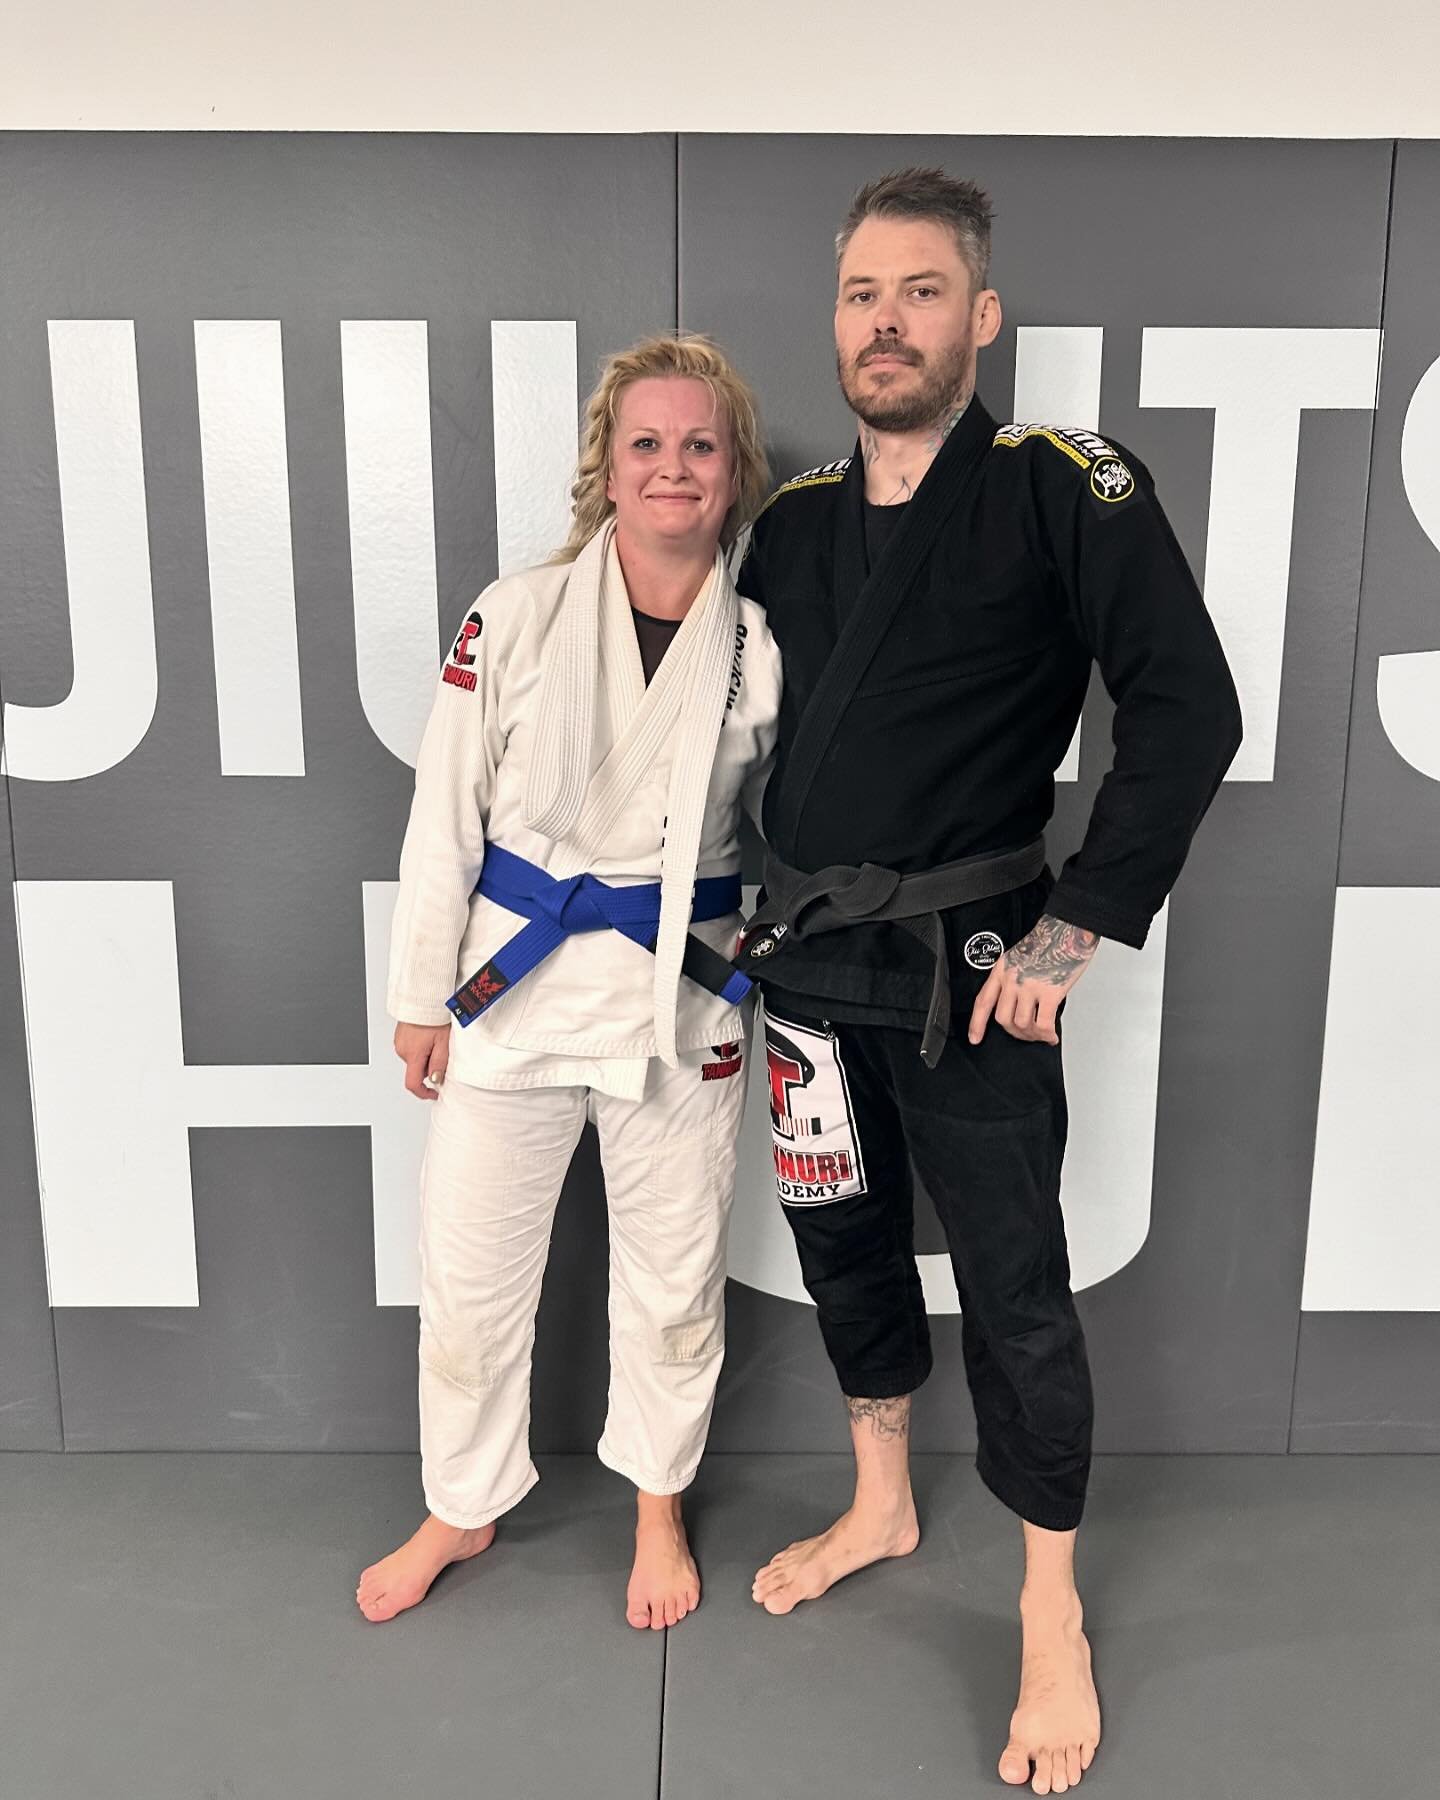 🟦🟦🟦🟦🟦🟦⬛️⬛️⬛️🟦🟦

Introducing Greta, our newest addition to the Blue Belt ranks at The Jiu-Jitsu Hub! 

She is consistent, hardworking and not afraid to get stuck in with bigger opponents to progress her skills.

We applaud Greta&rsquo;s dedica